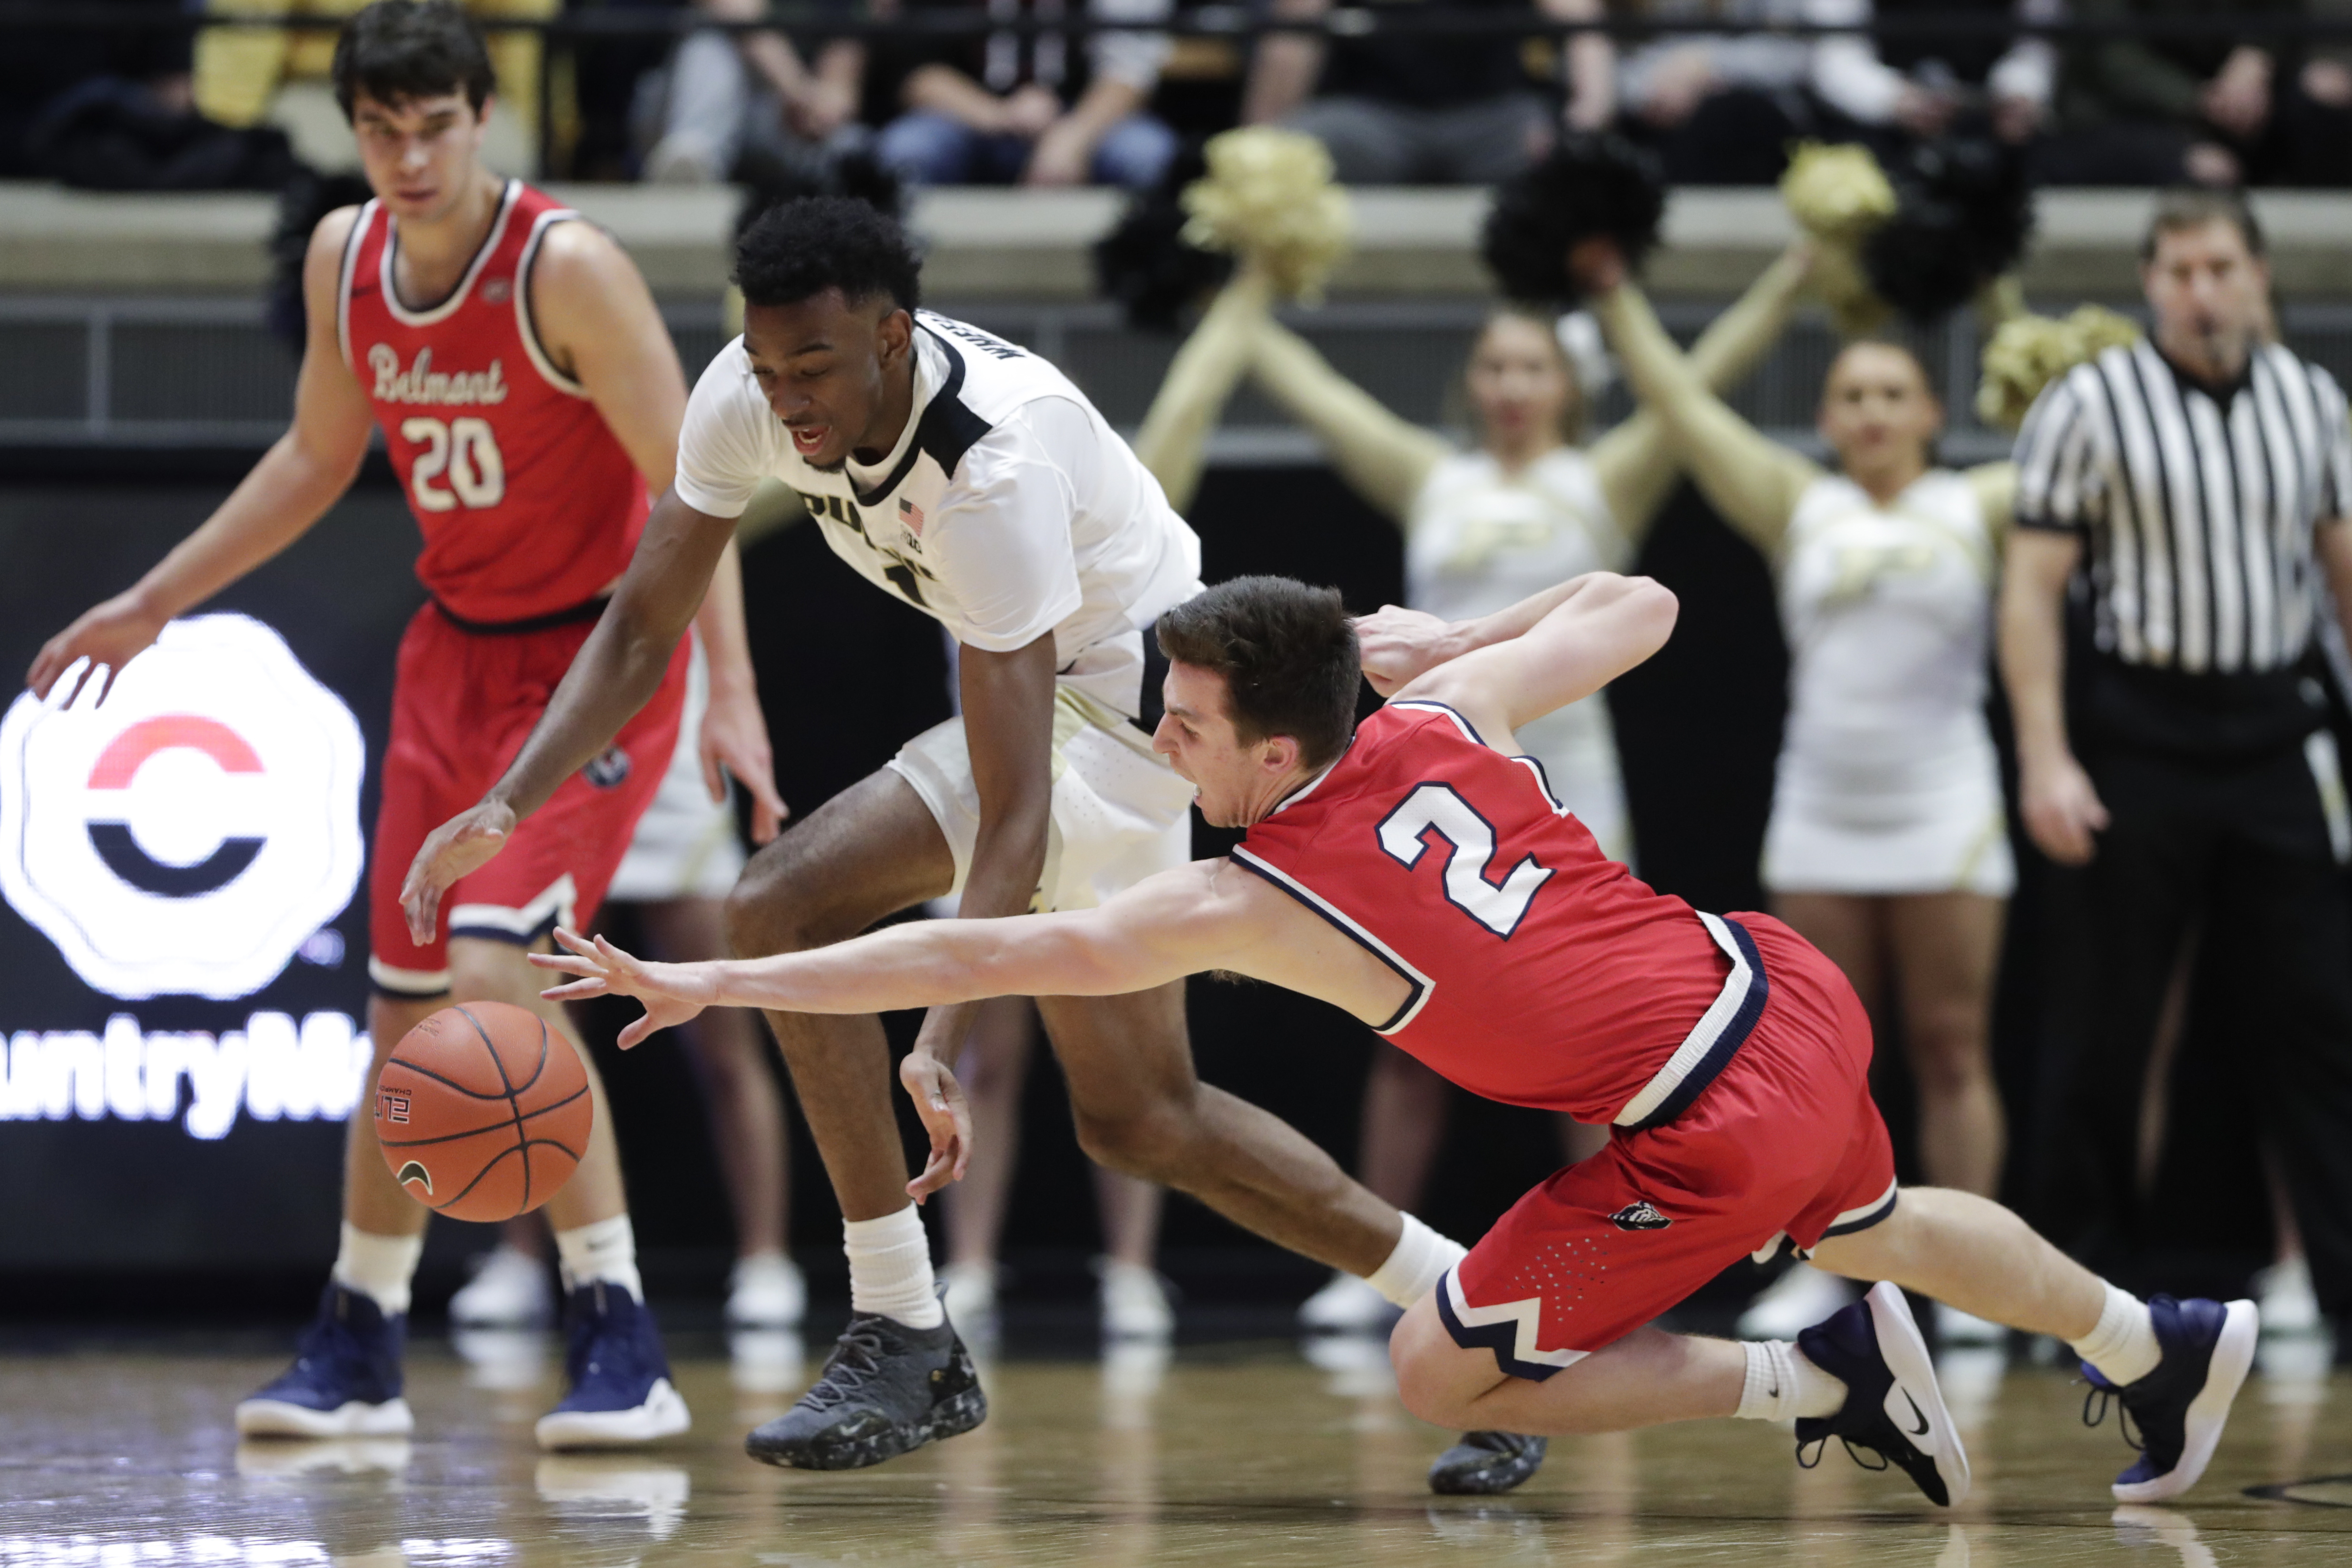 Purdue defense clamps down on Belmont in 73-62 victory